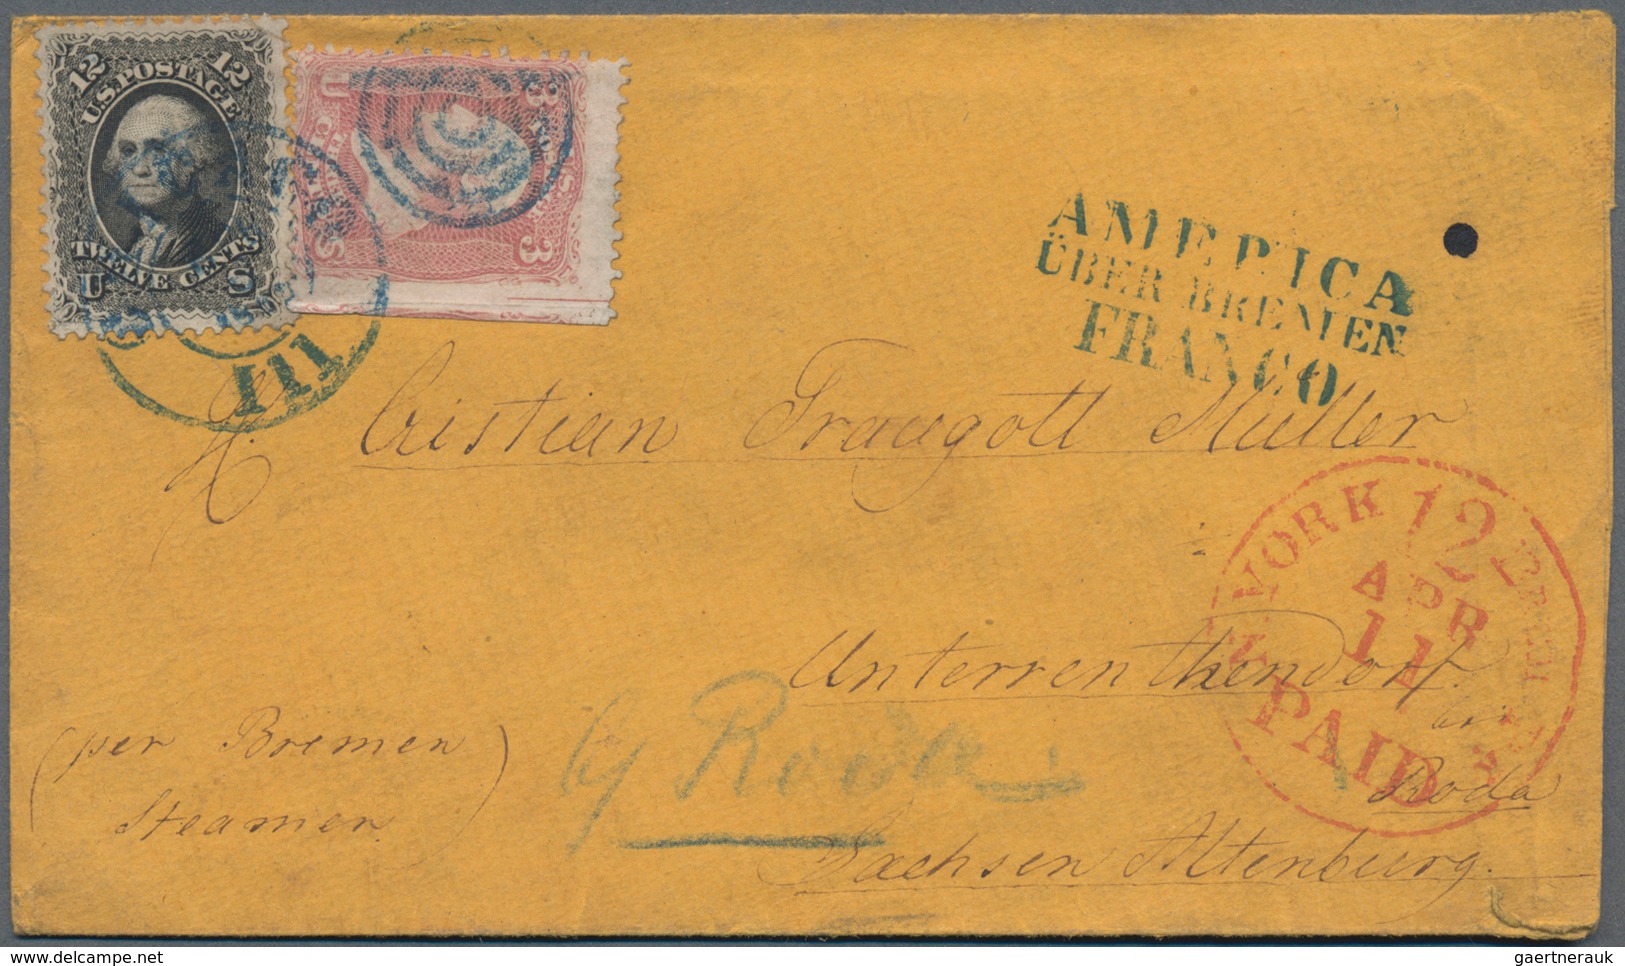 Vereinigte Staaten Von Amerika: 1863, 3c. Rose And 12c. Black (slight Imperfections) On Cover From " - Briefe U. Dokumente